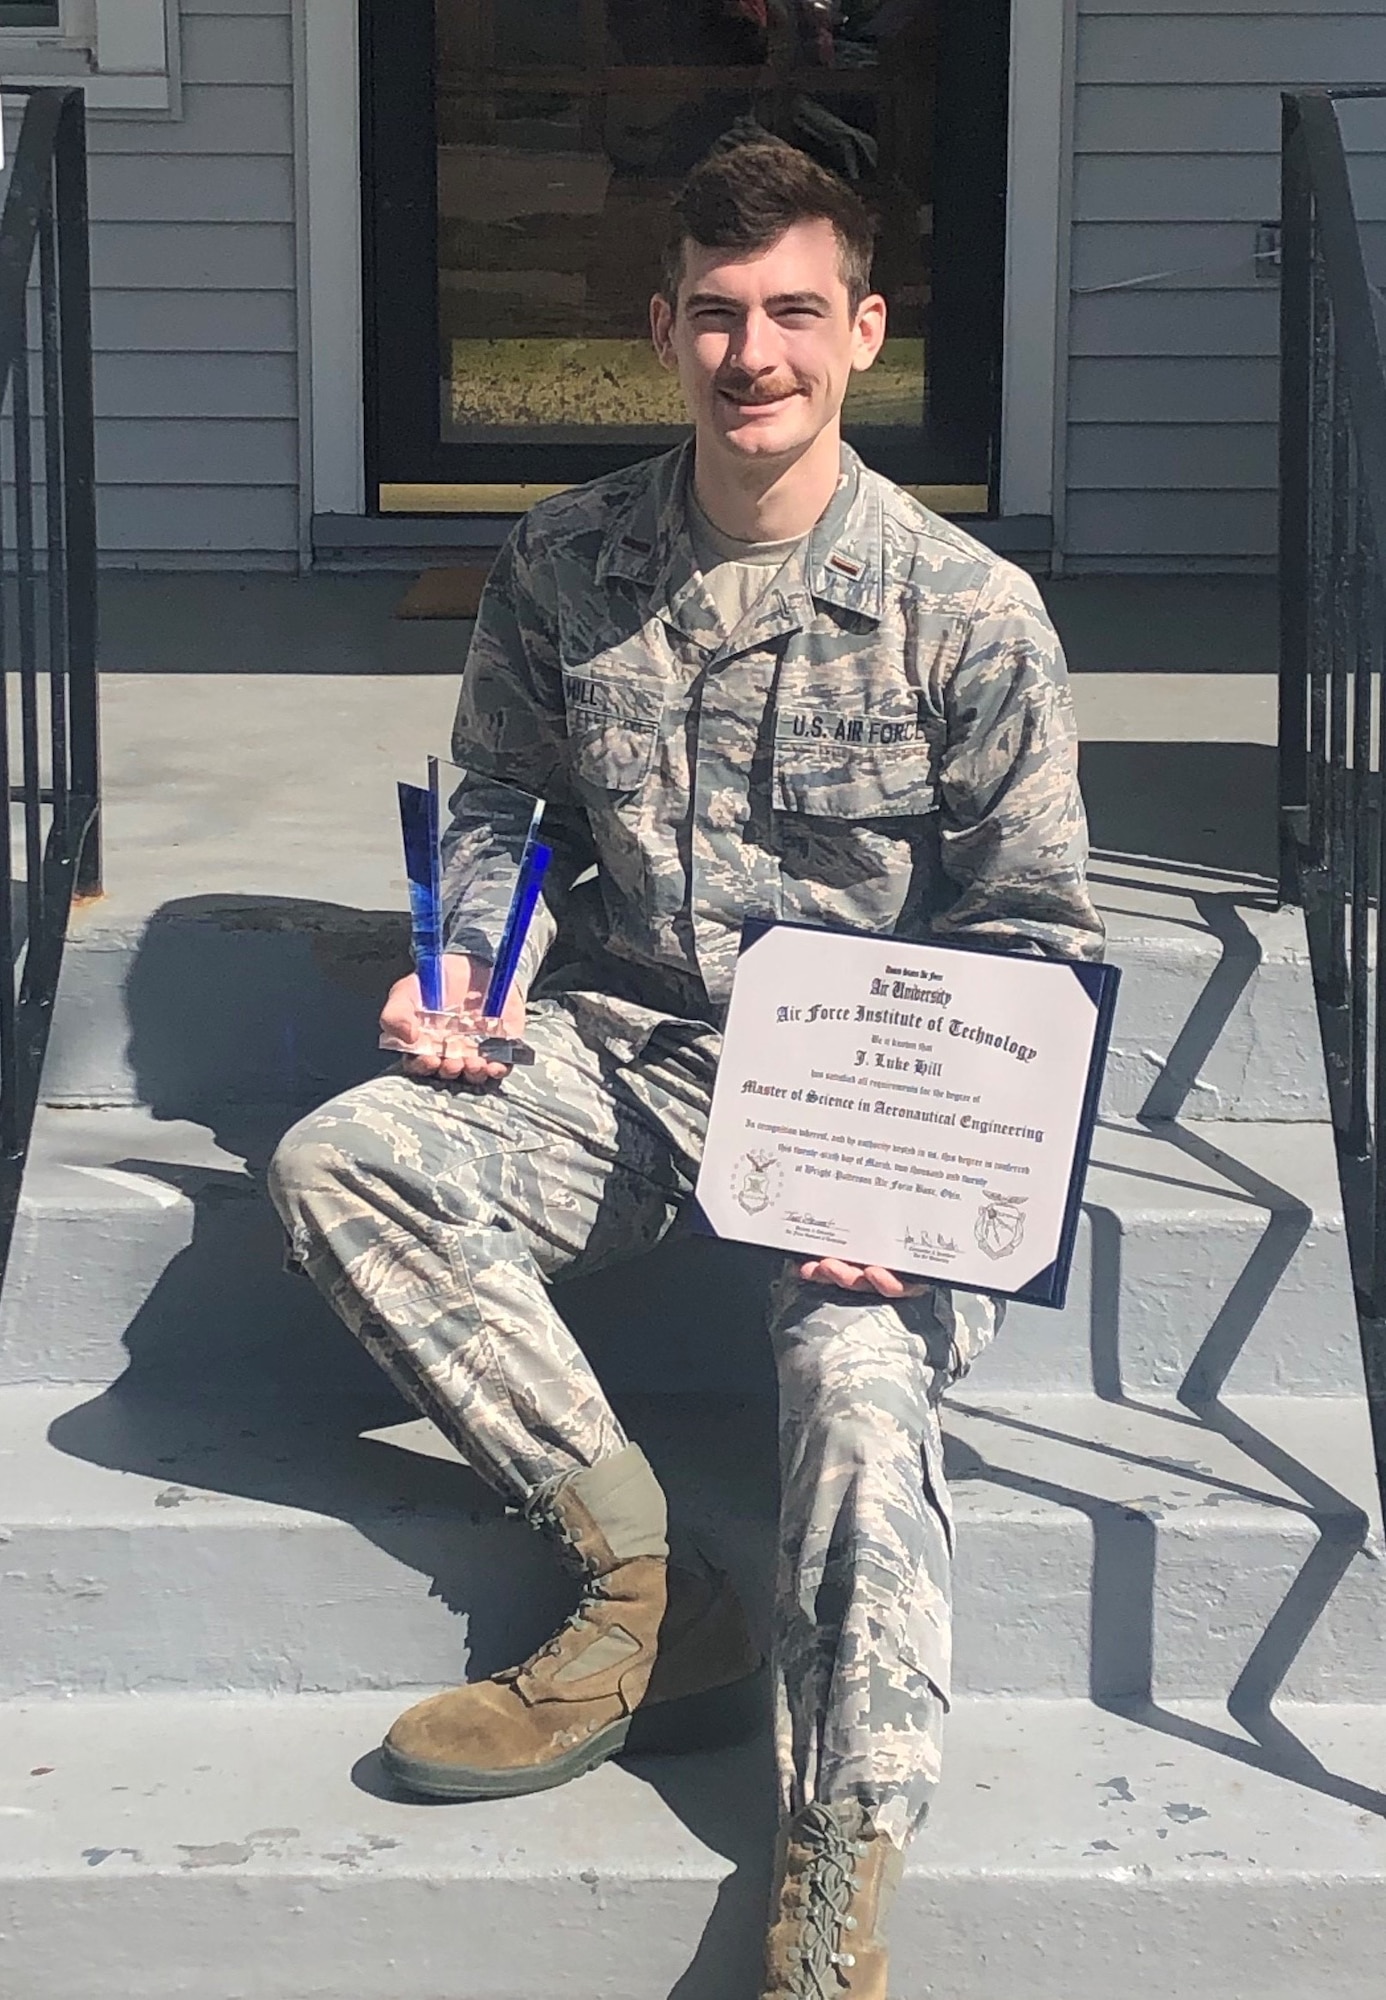 1st Lt. Jonathan “Luke” Hill, a researcher with AFRL, poses with his Dean's List certificate he earned while attending the Air Force Institute of Technology at Wright-Patterson Air Force Base, Ohio. (Courtesy photo)